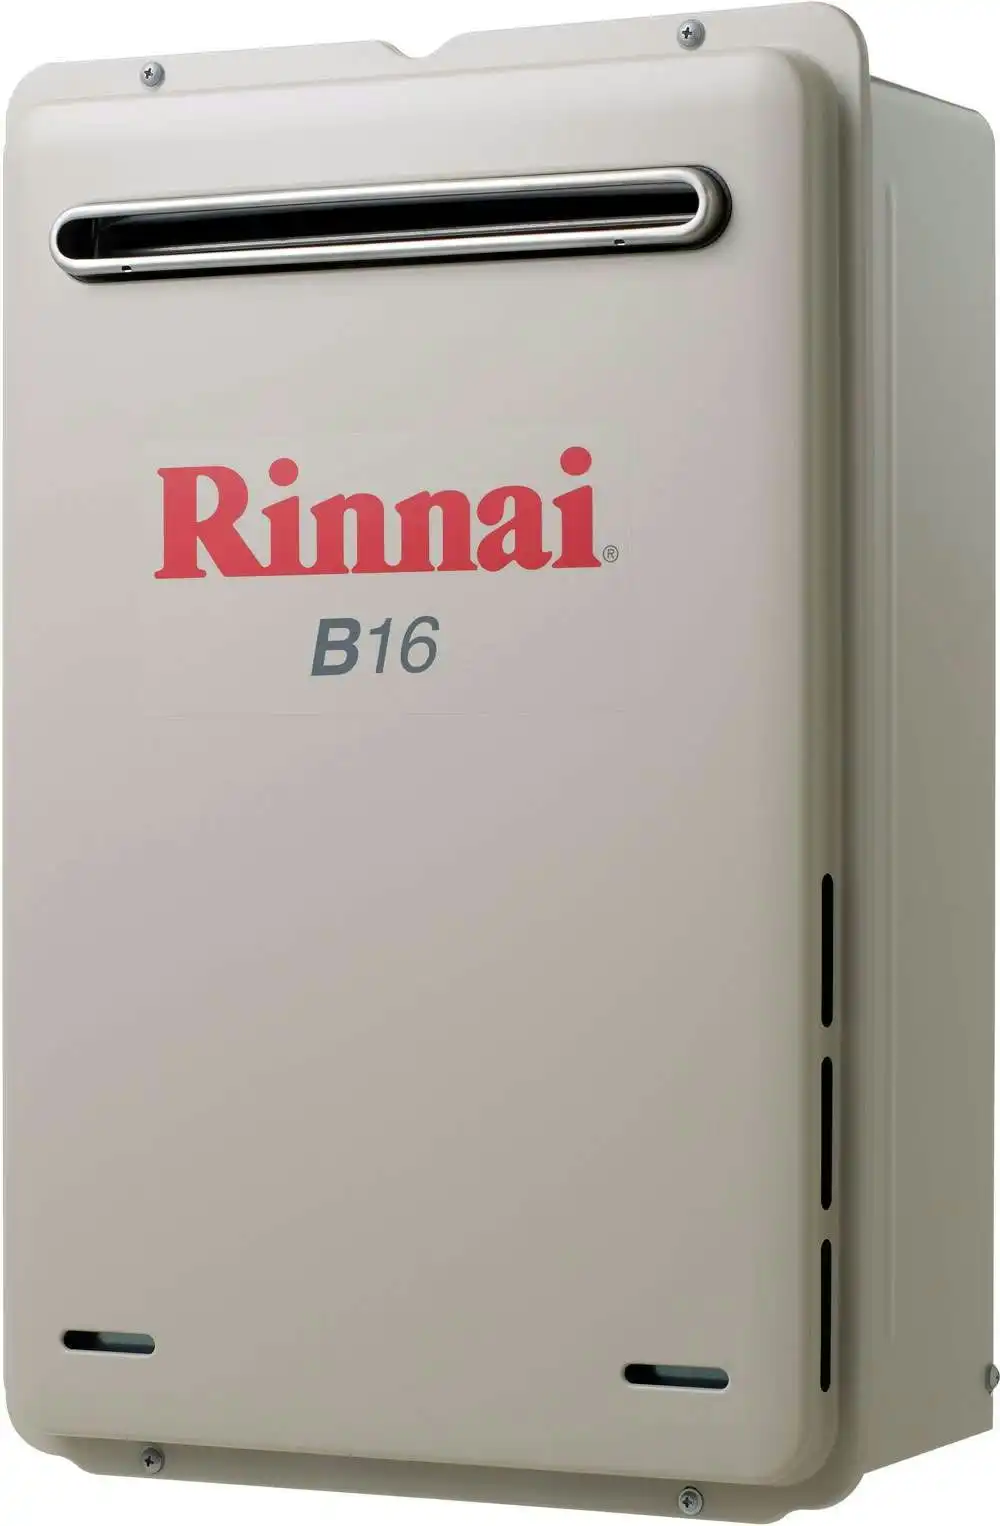 Rinnai Builders 60oC 16L Instant Hot Water System B16N60A B16 *NATURAL GAS*